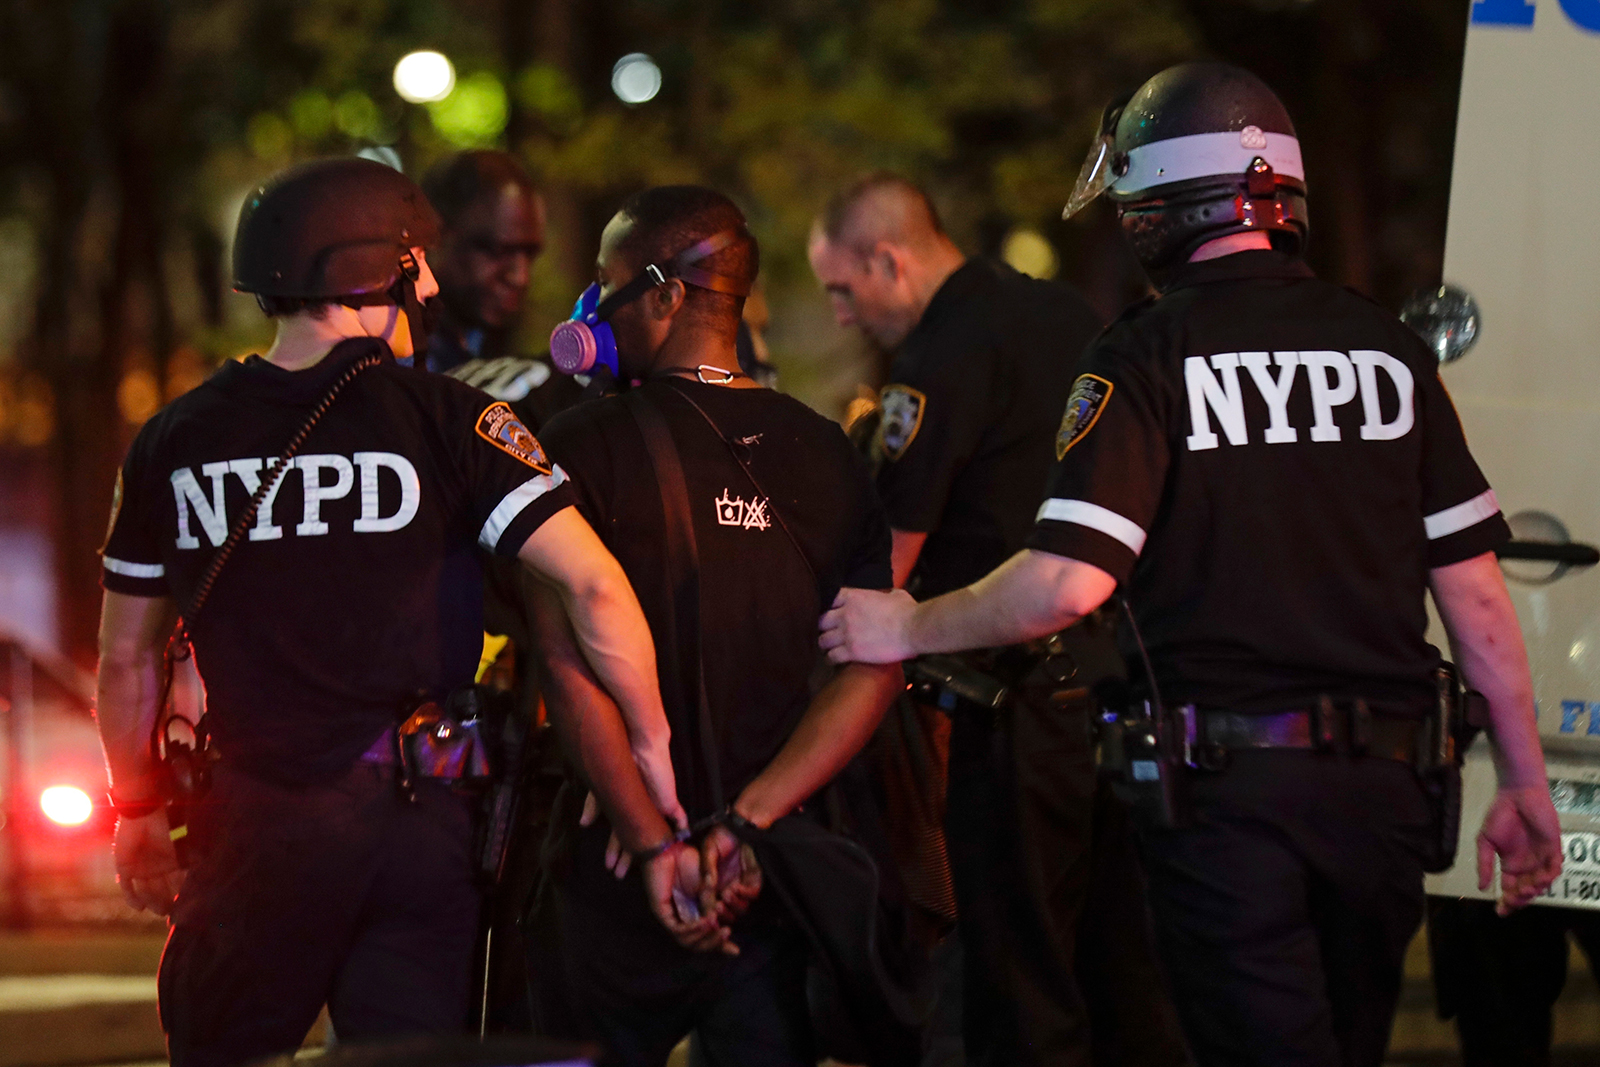 New York City police officers escort a protester after he was arrested at a rally on June 3, in the Brooklyn borough of New York.